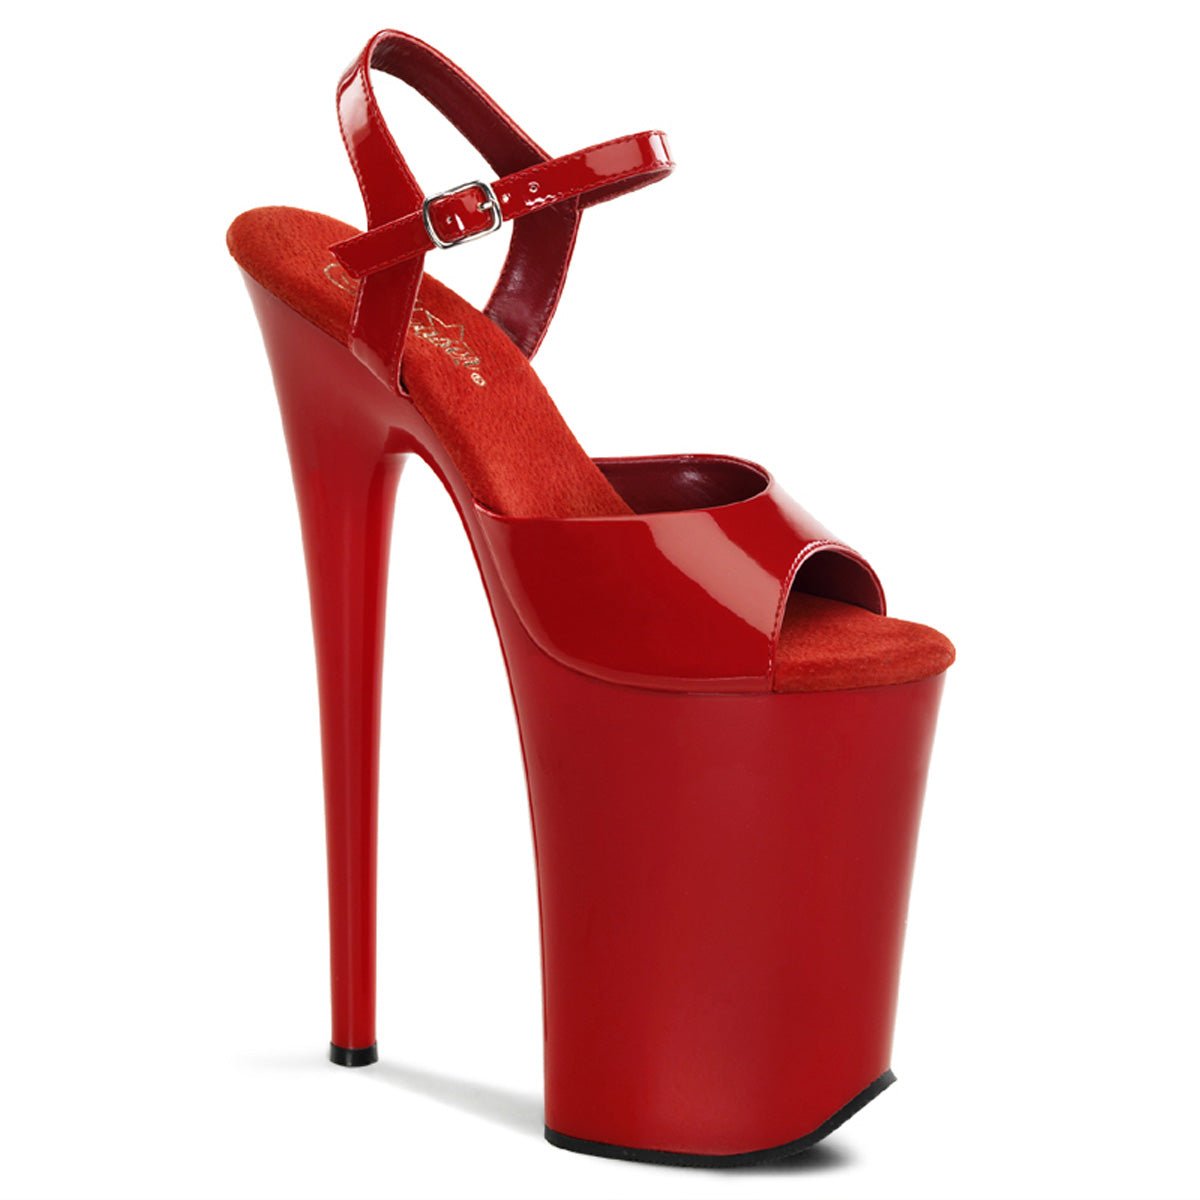 Pleaser Infinity 909 Red - Model Express VancouverShoes